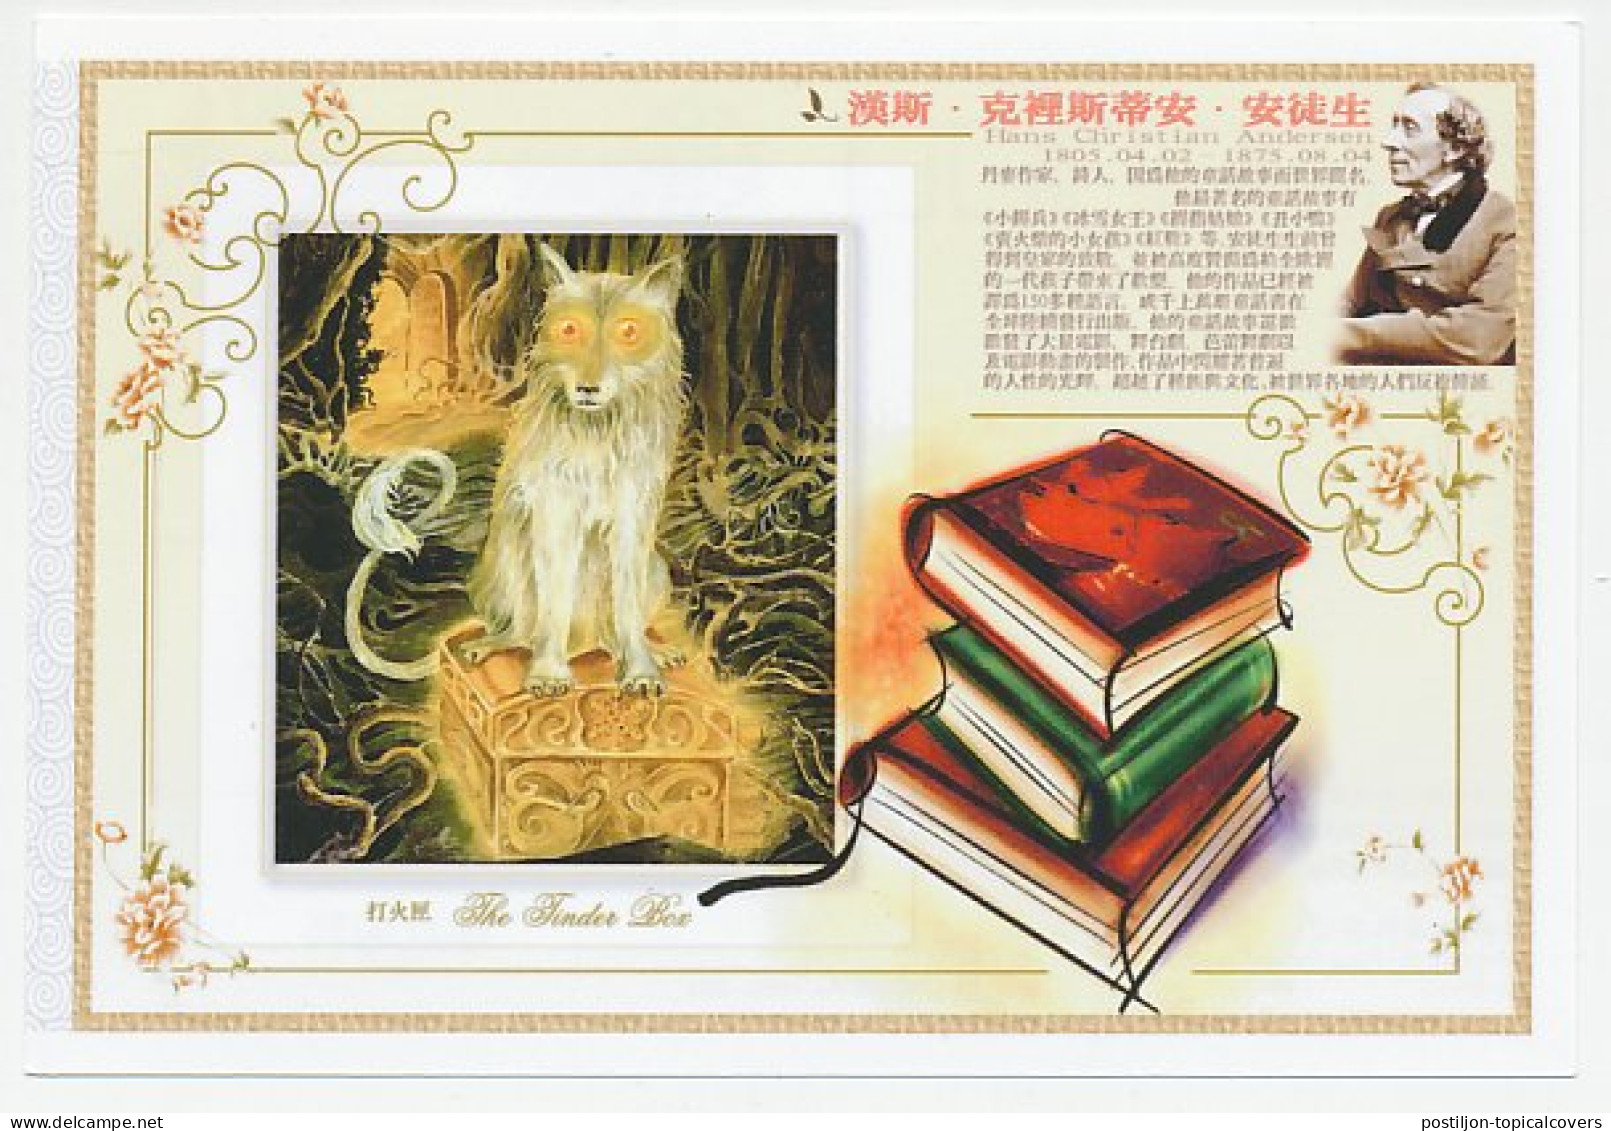 Postal Stationery China 2009 Hans Christian Andersen - The Tinder Box - Contes, Fables & Légendes